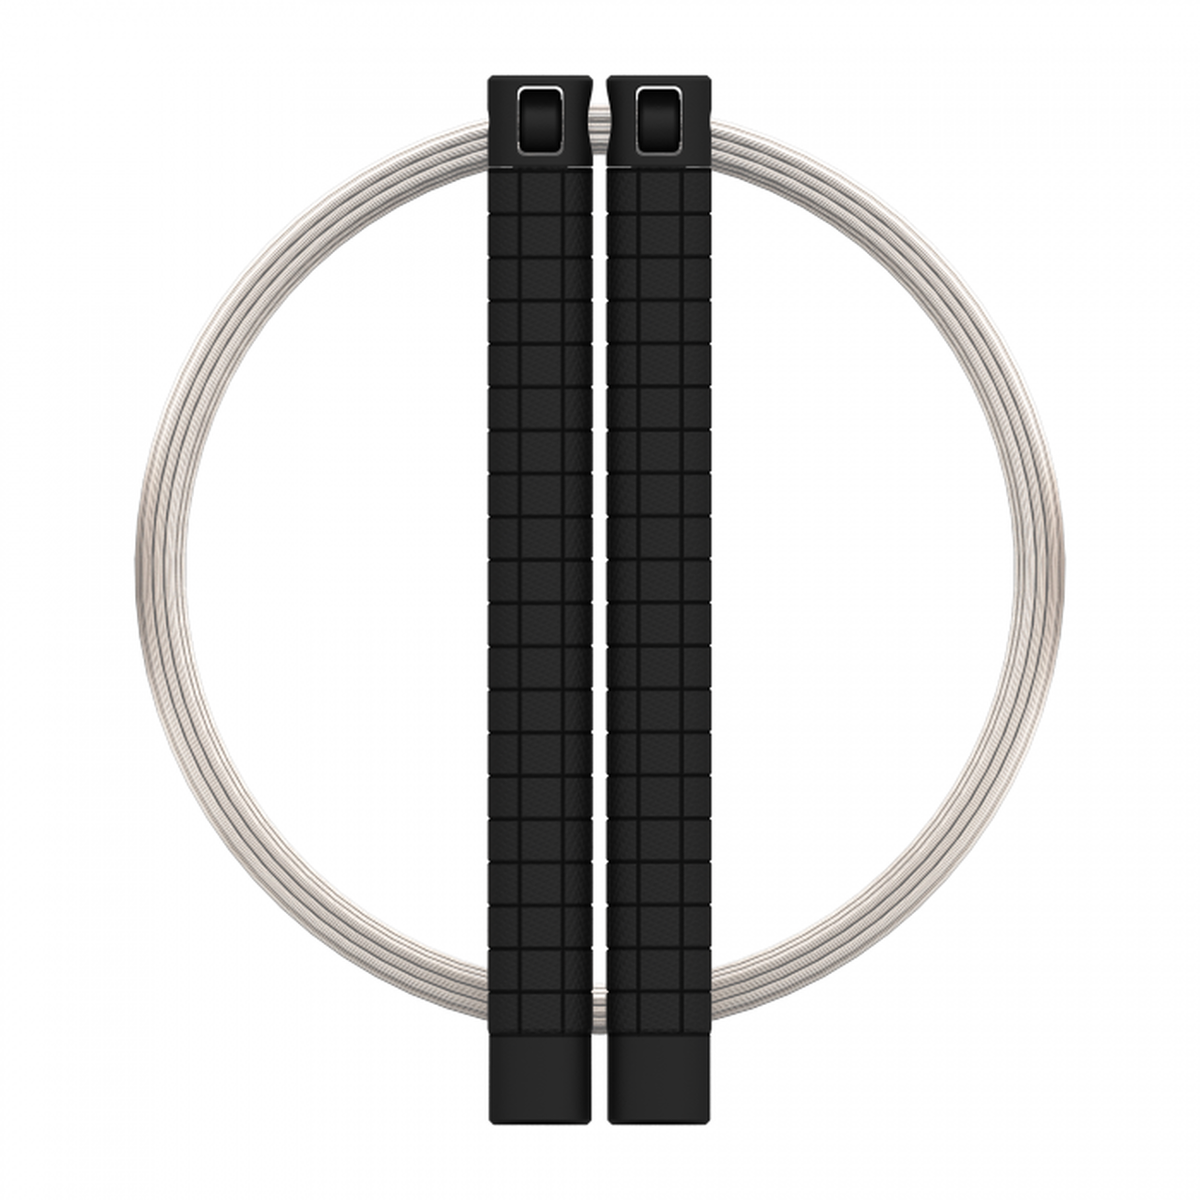 COMP Jump Rope - RPM